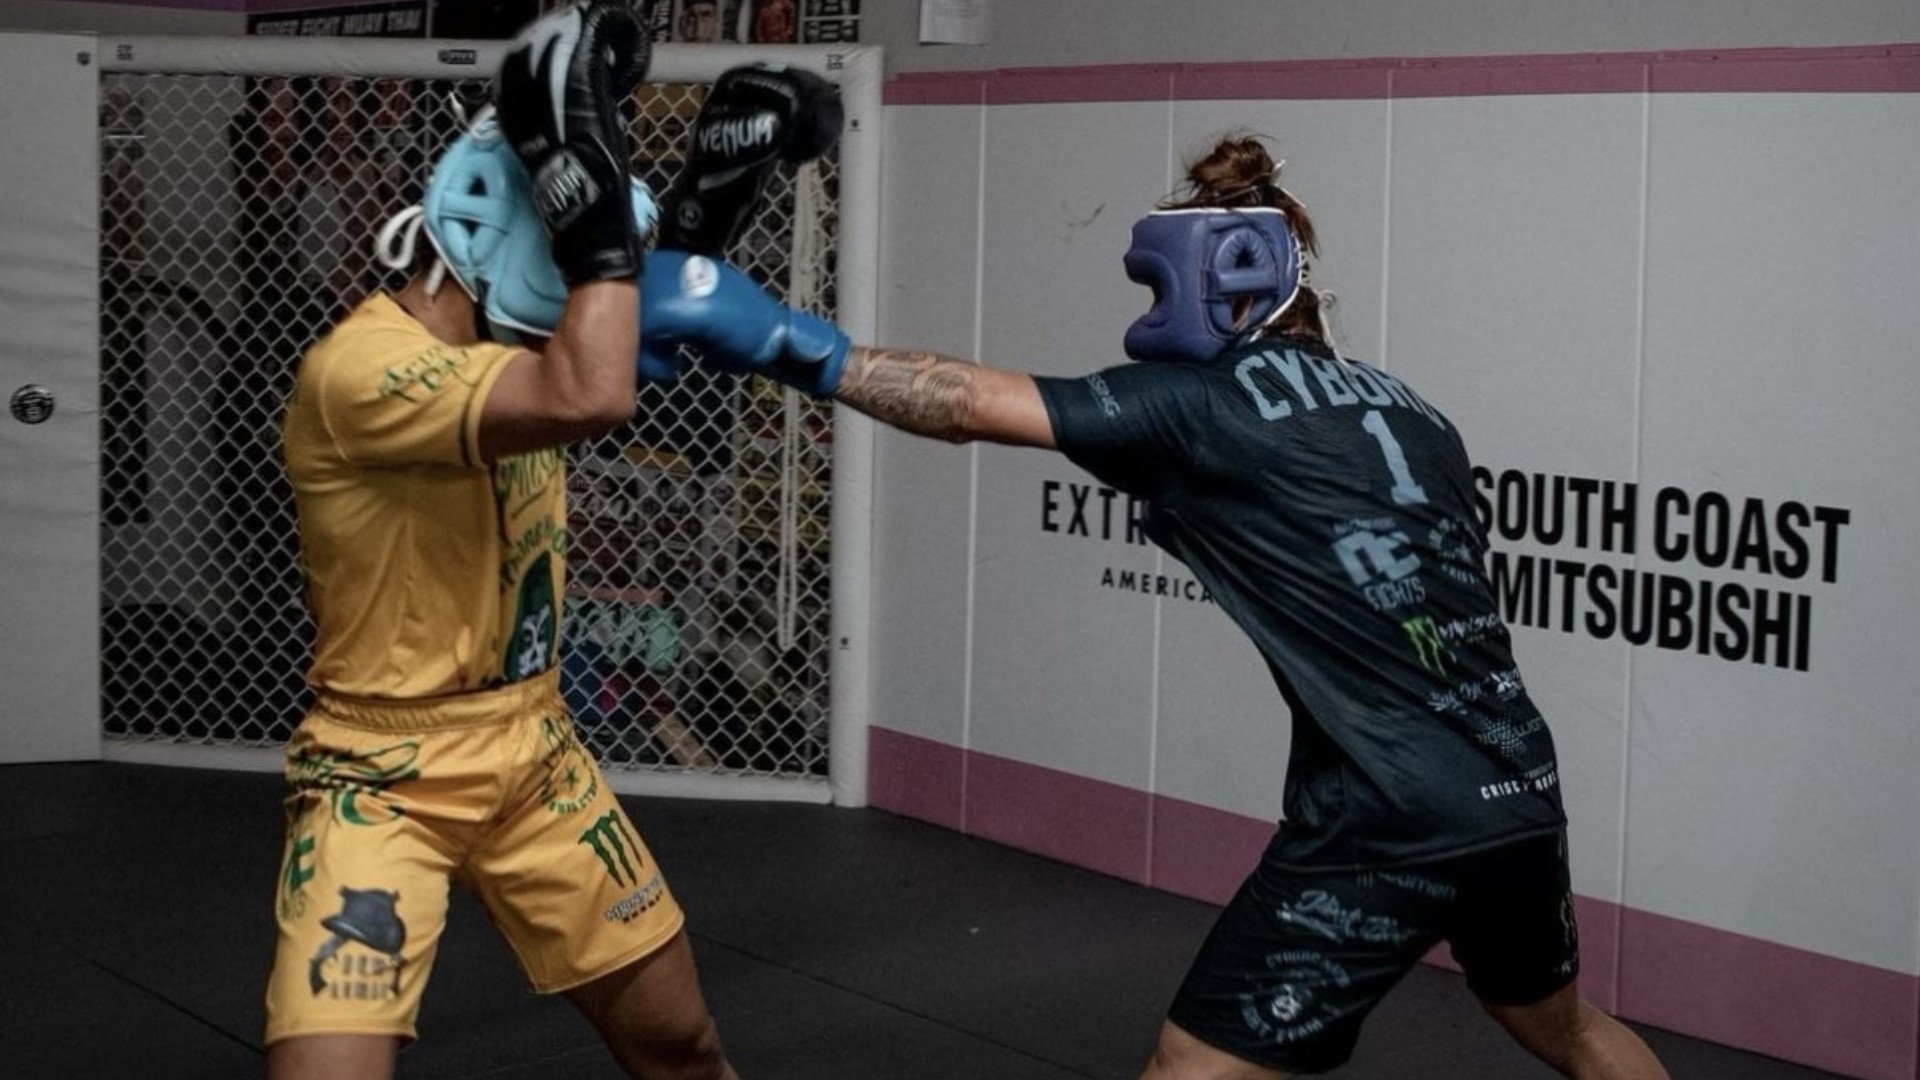 The former UFC star turned professional boxer talks about how she will continue her legendary run in the combat sports world.